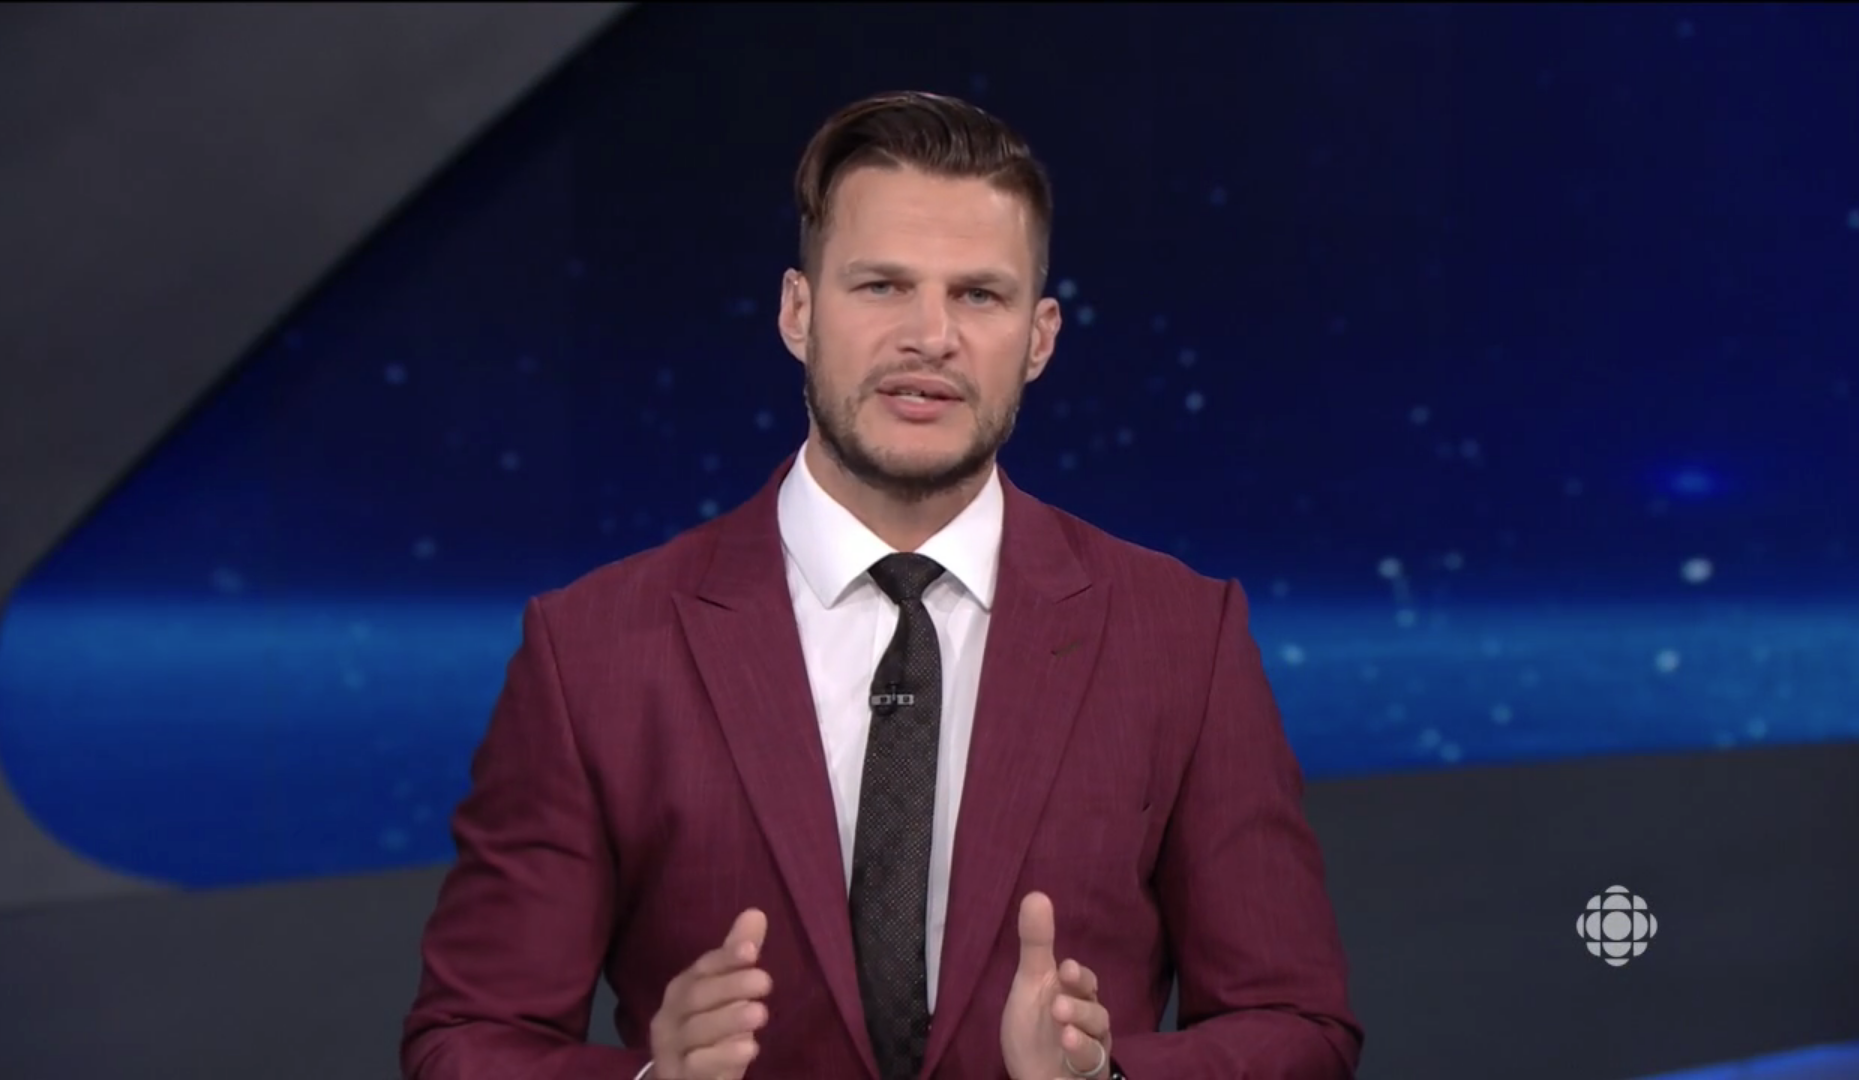 Kevin Bieksa needs to become a mainstay on Hockey Night in Canada